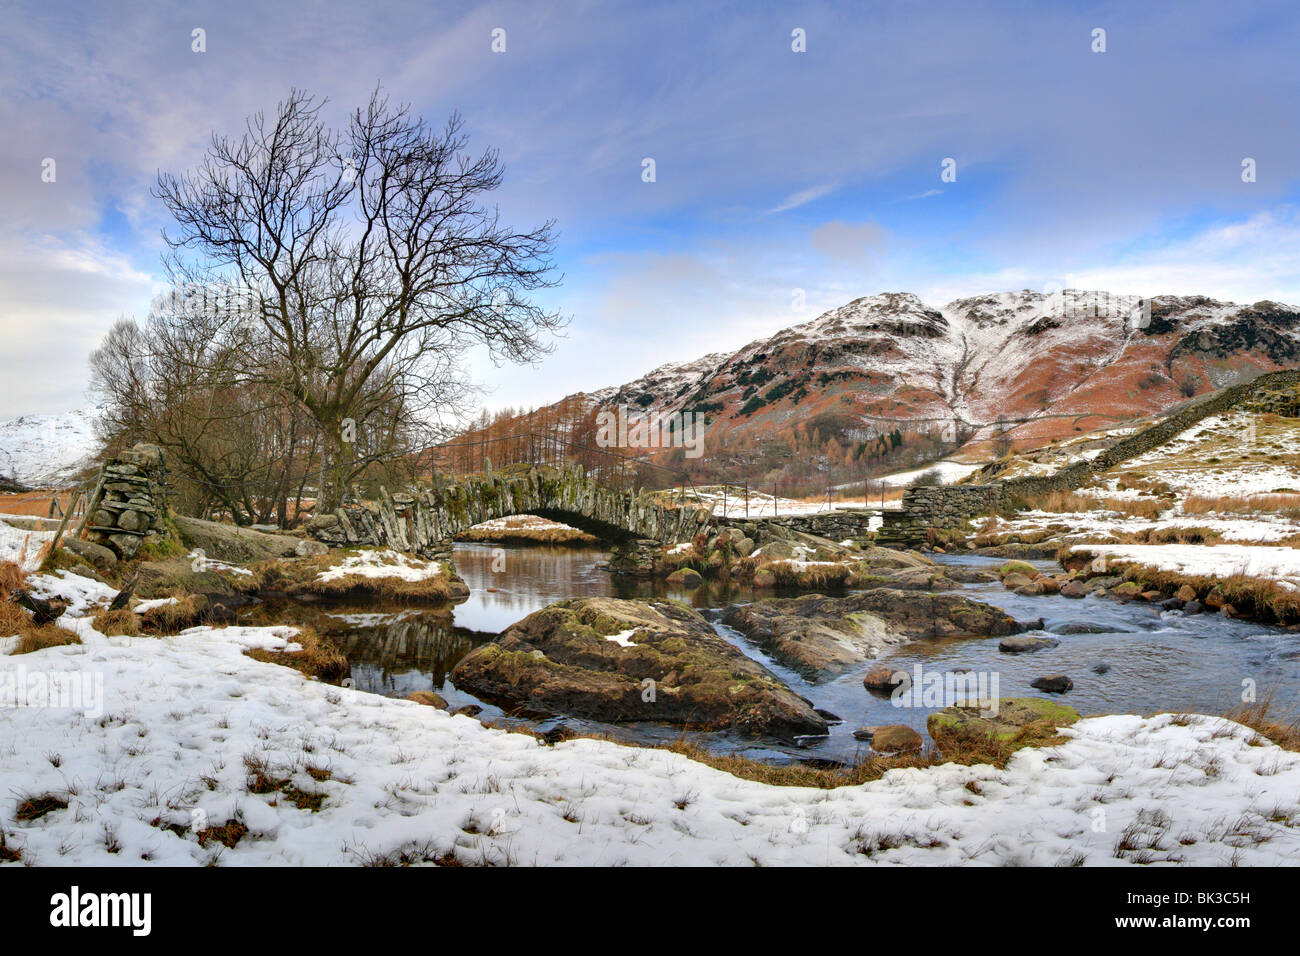 Slaters Bridge, Little Langdale, River Brathay, Lake District National Park, UK, Winter, snow on the ground. Stock Photo